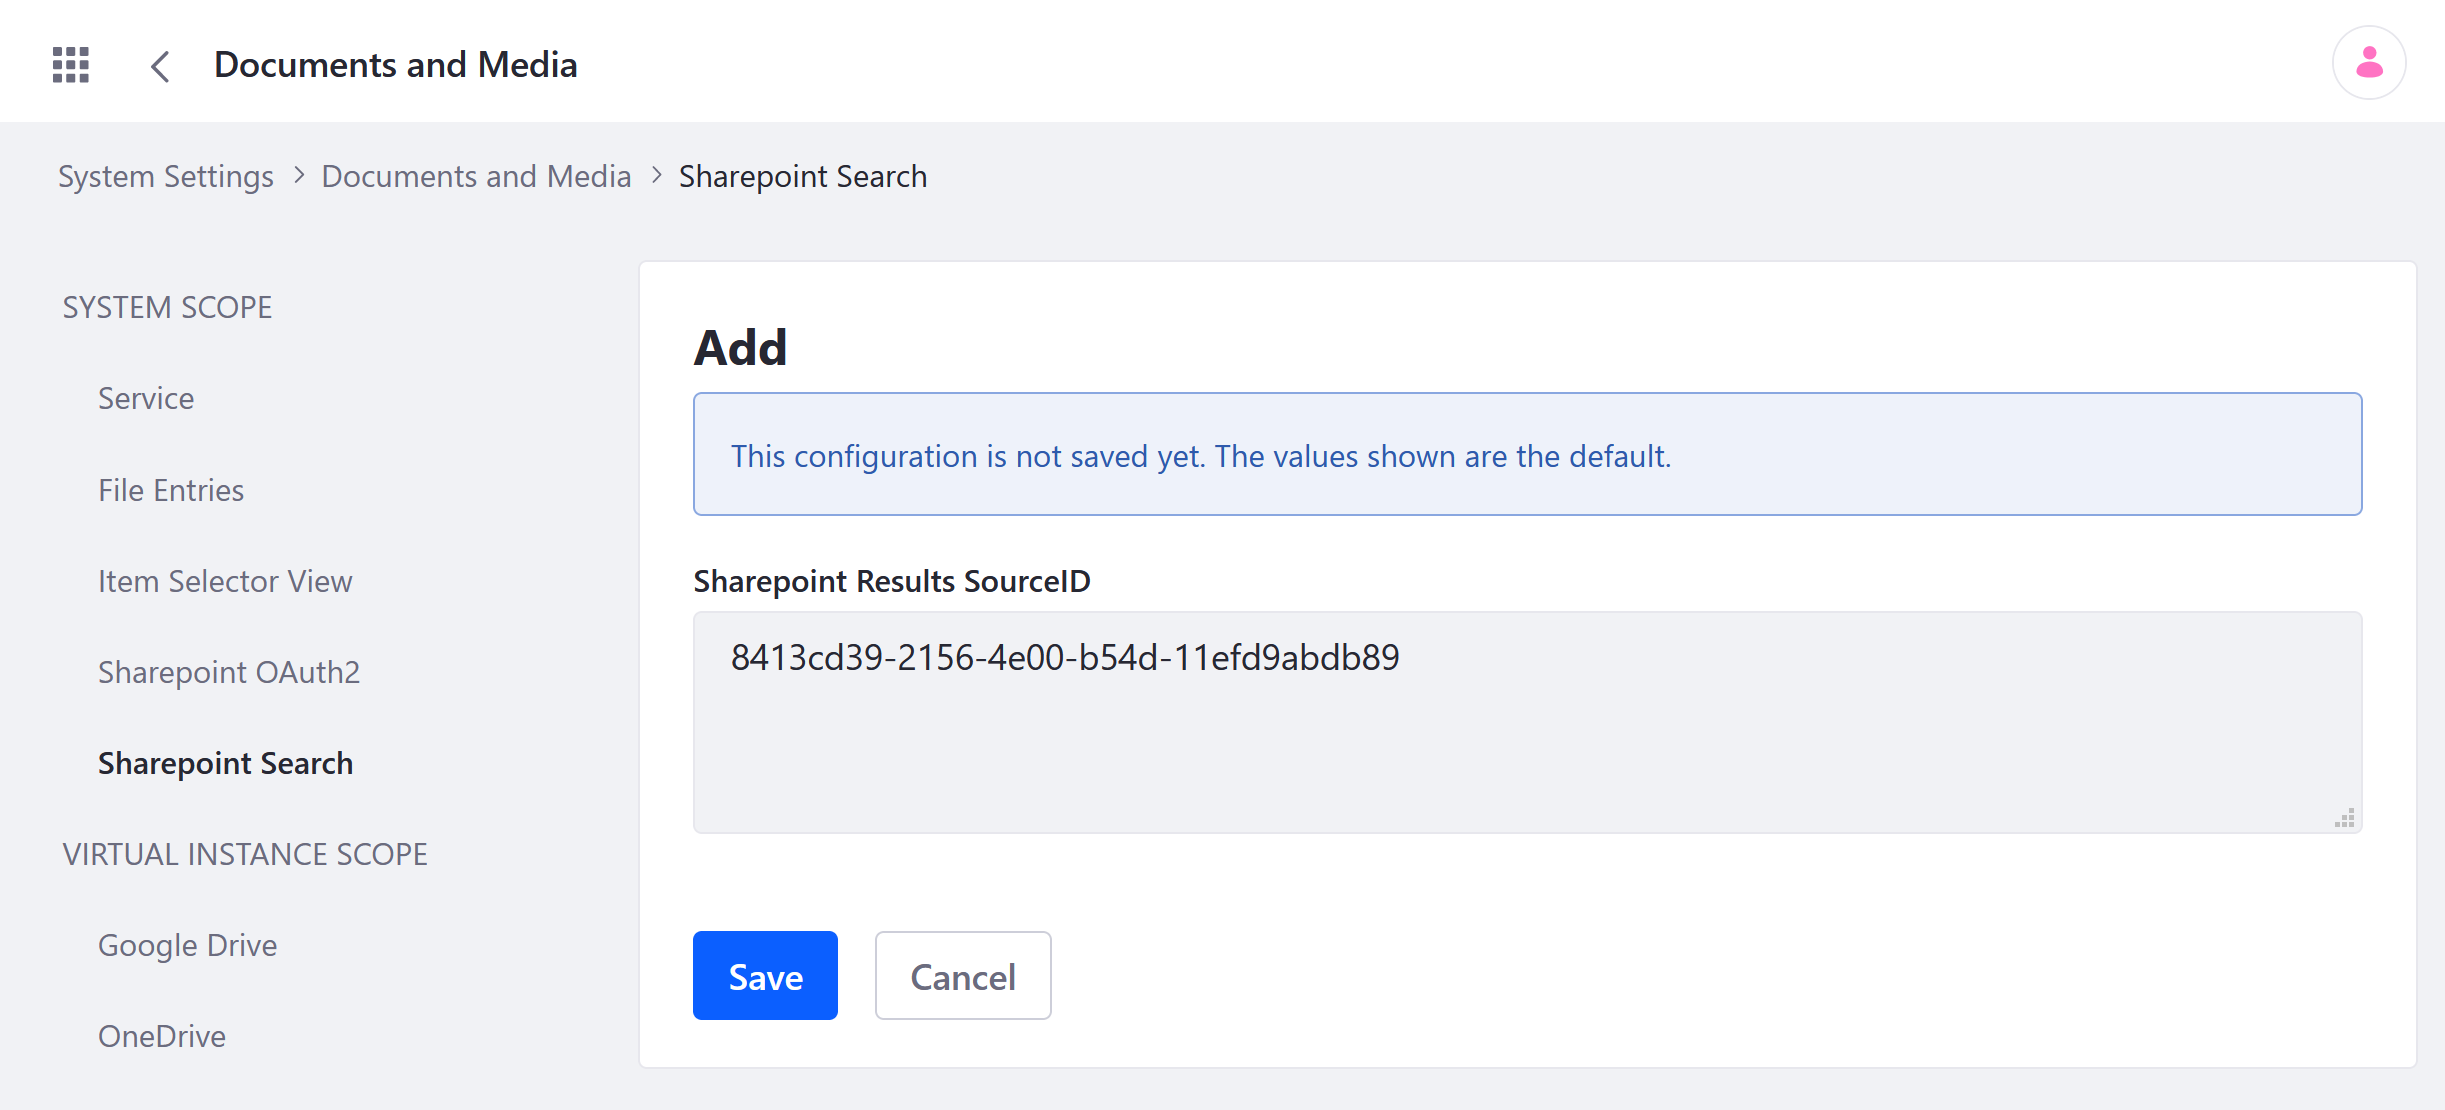 Click Add to create a new SharePoint Search configuration entry.